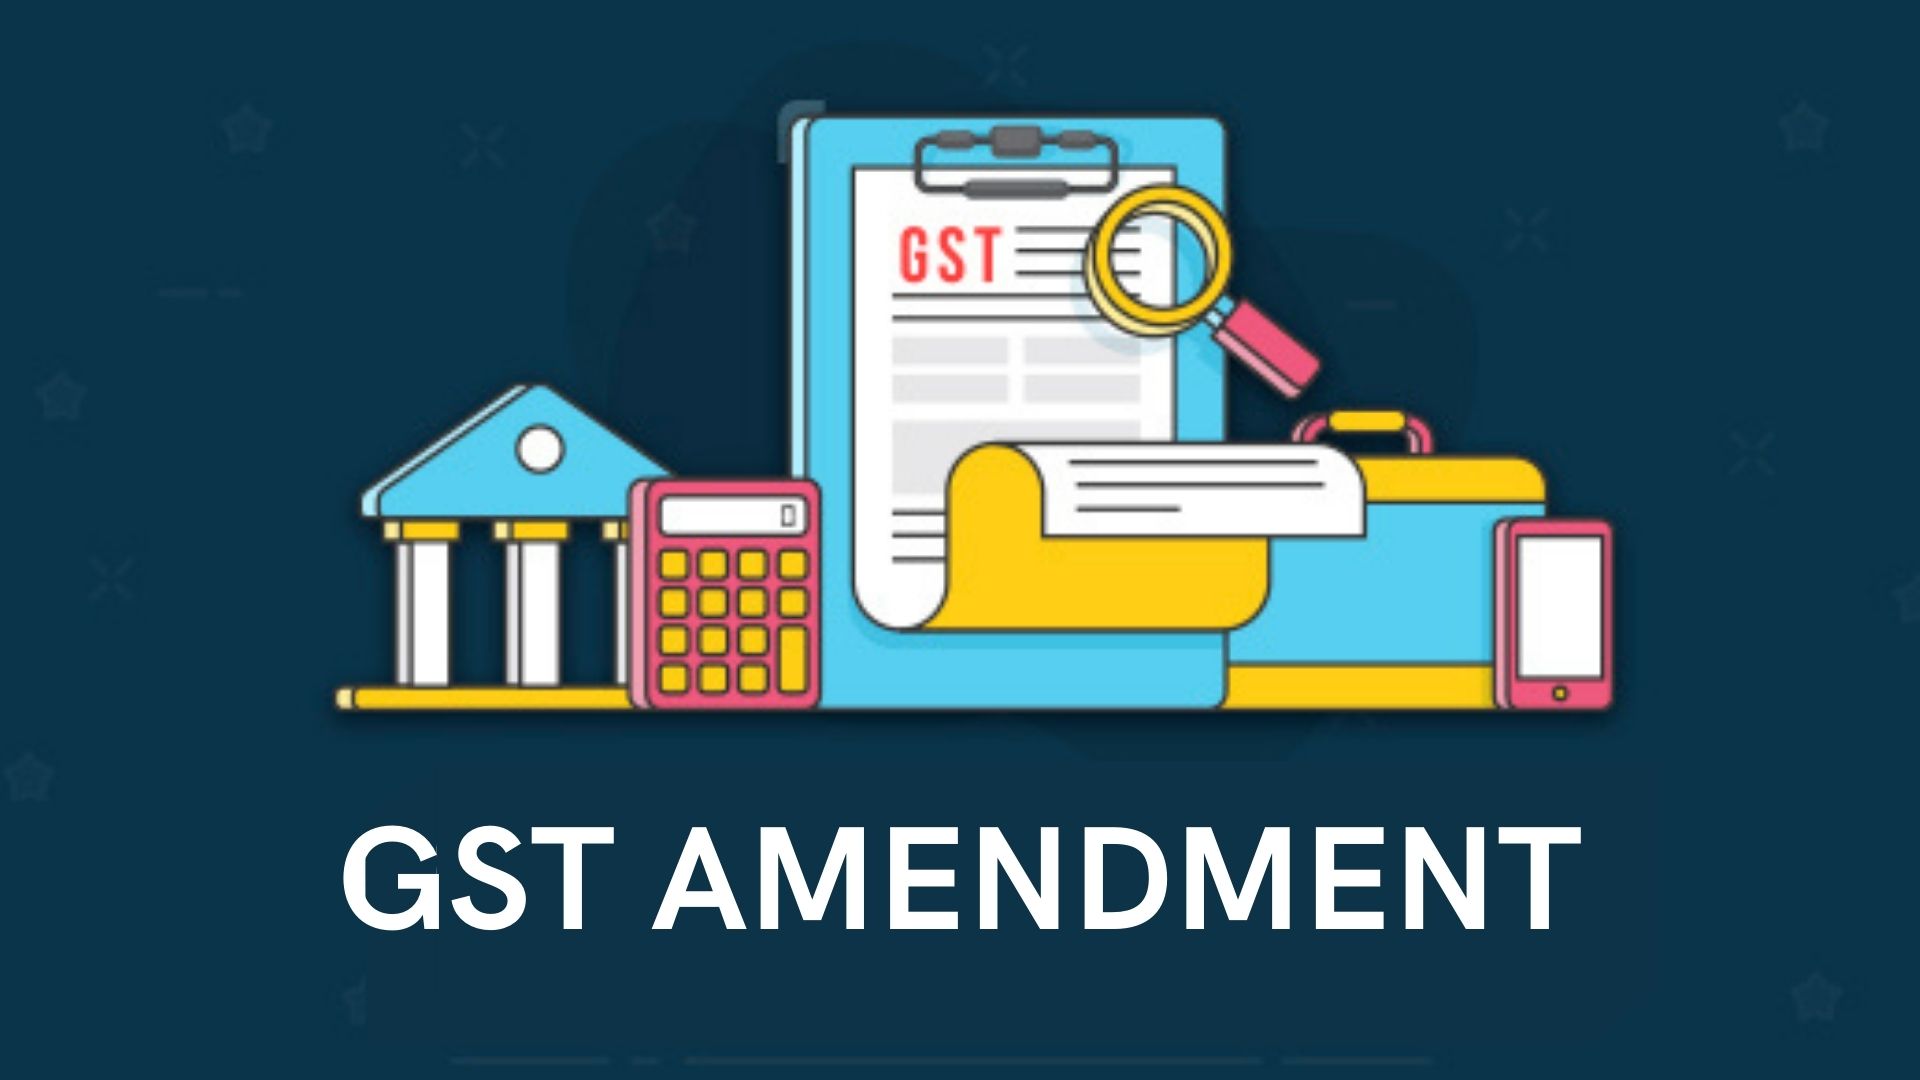 GST Amendments proposed in in Budget 2022